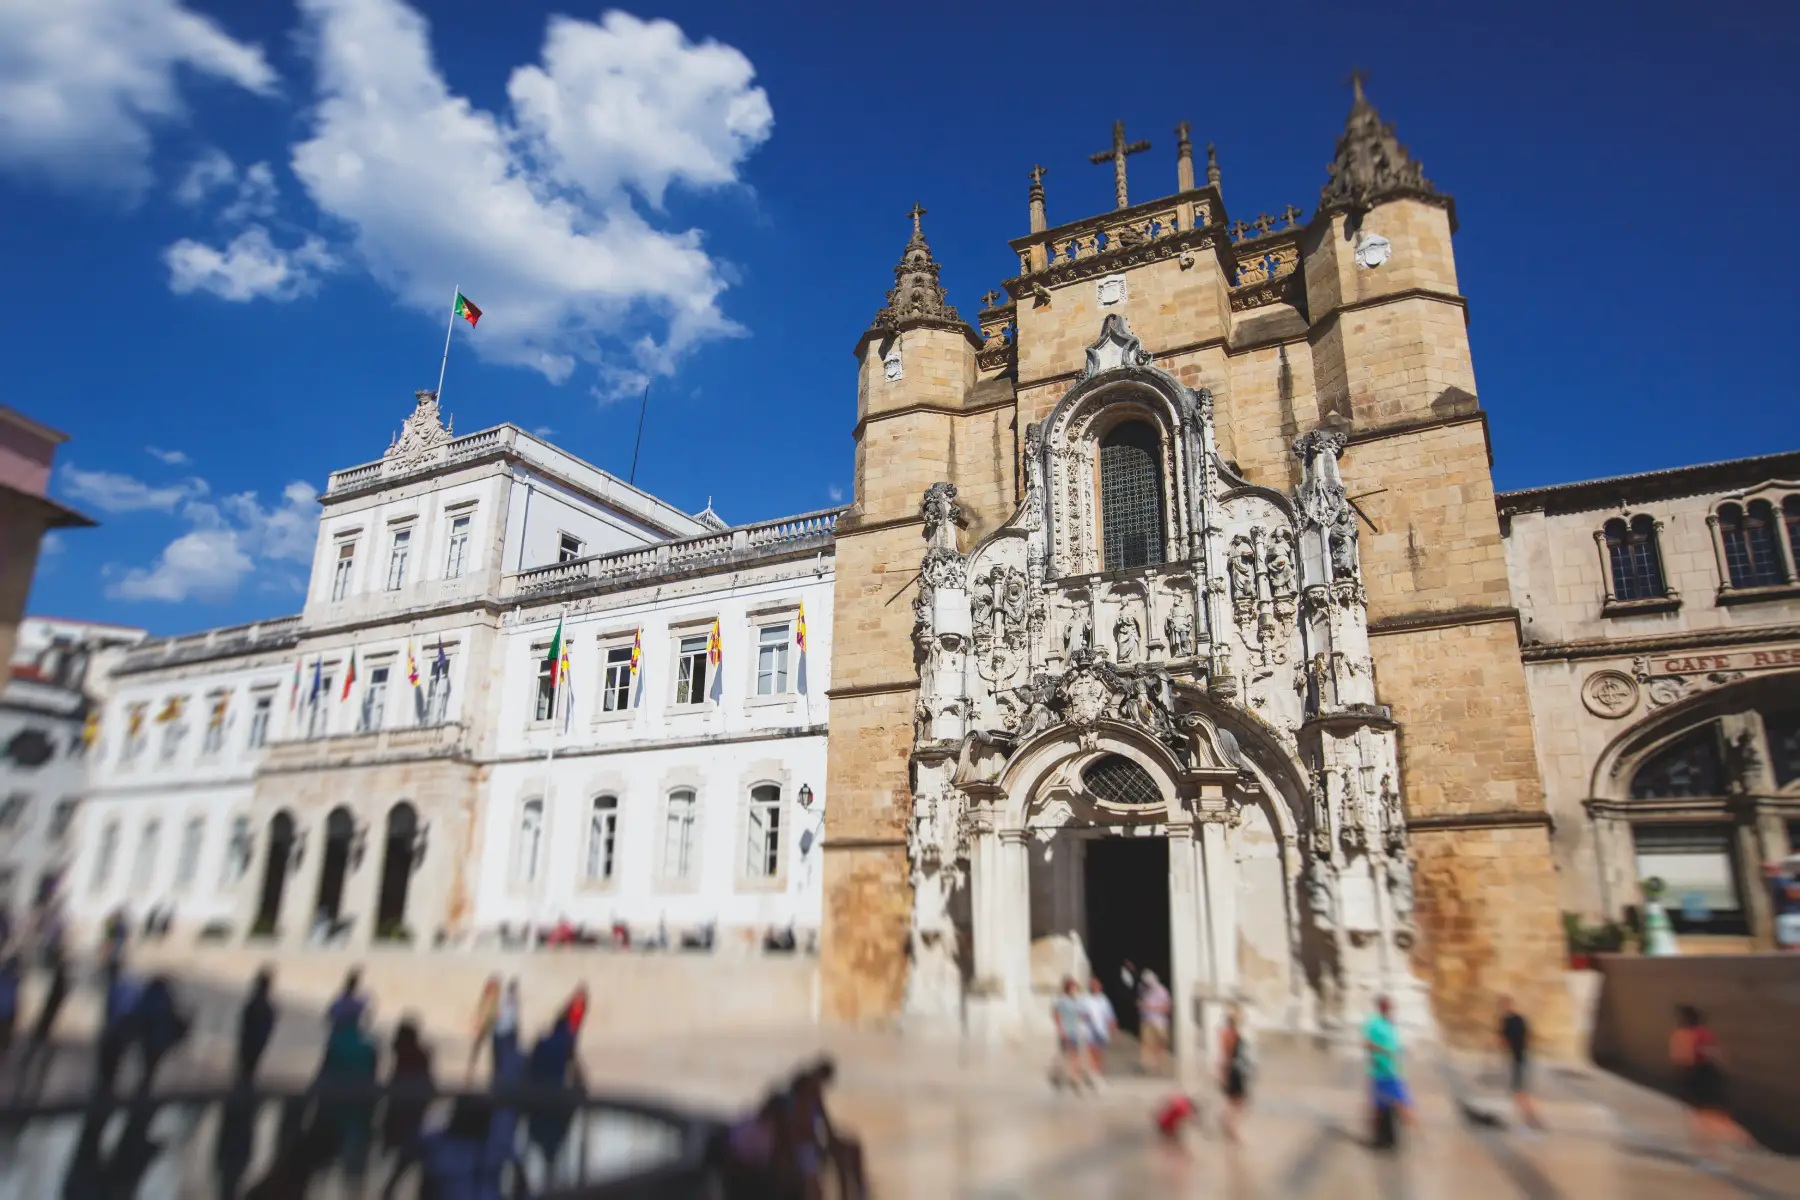 The facade of the University of Coimbra on a sunny summer's day